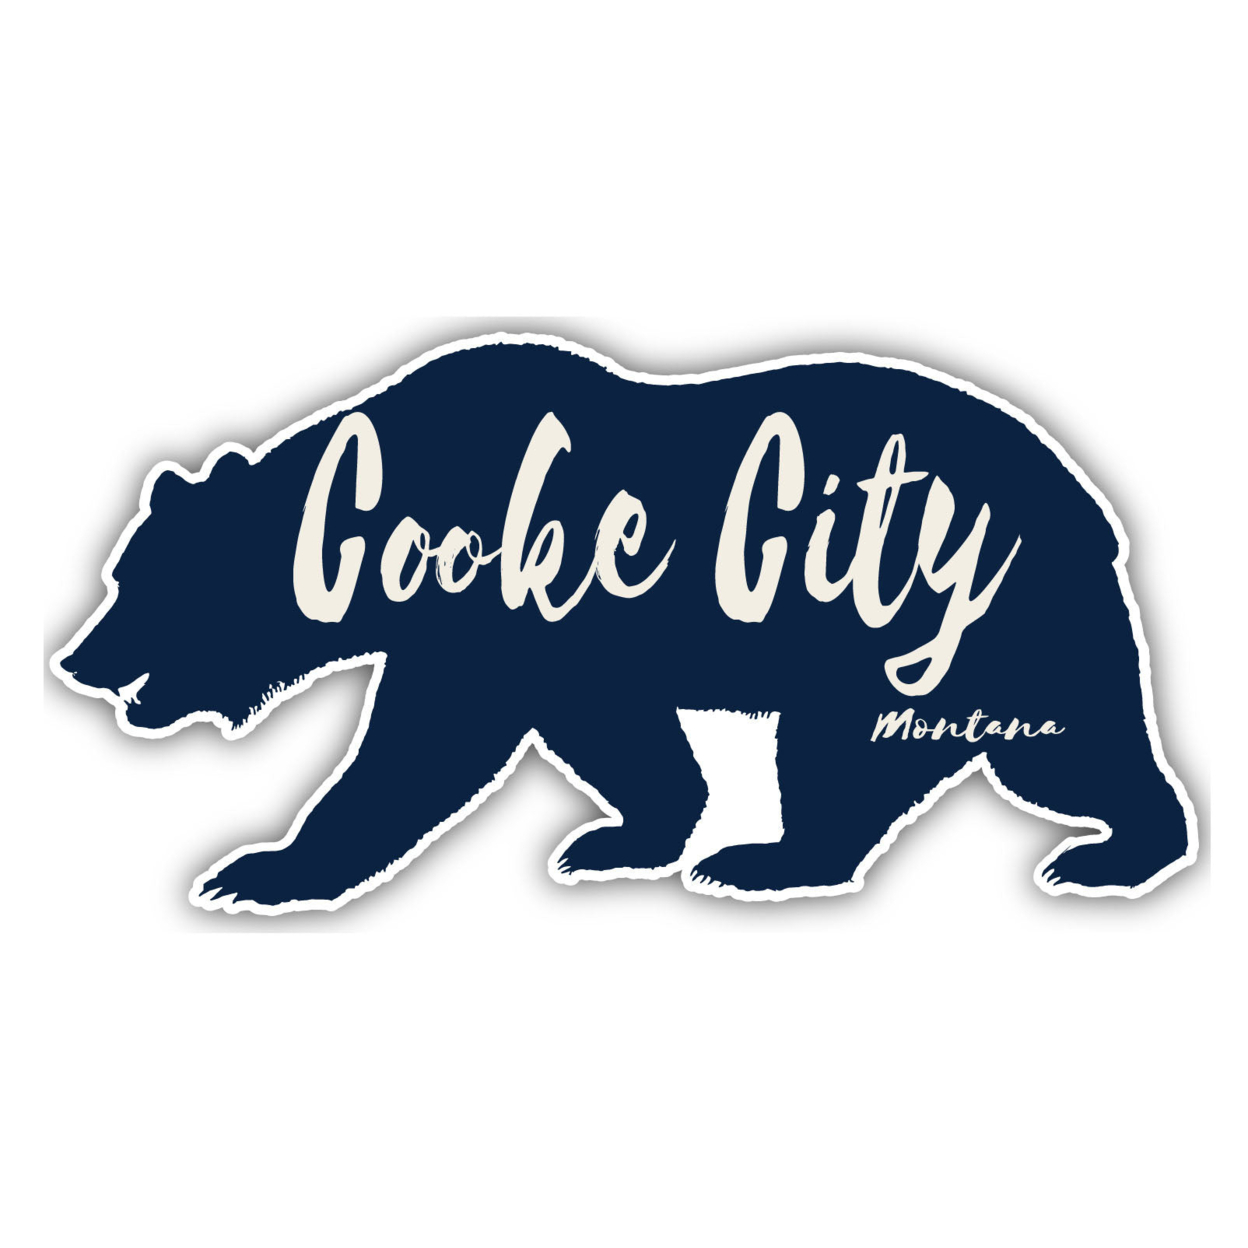 Cooke City Montana Souvenir Decorative Stickers (Choose Theme And Size) - 4-Pack, 4-Inch, Bear